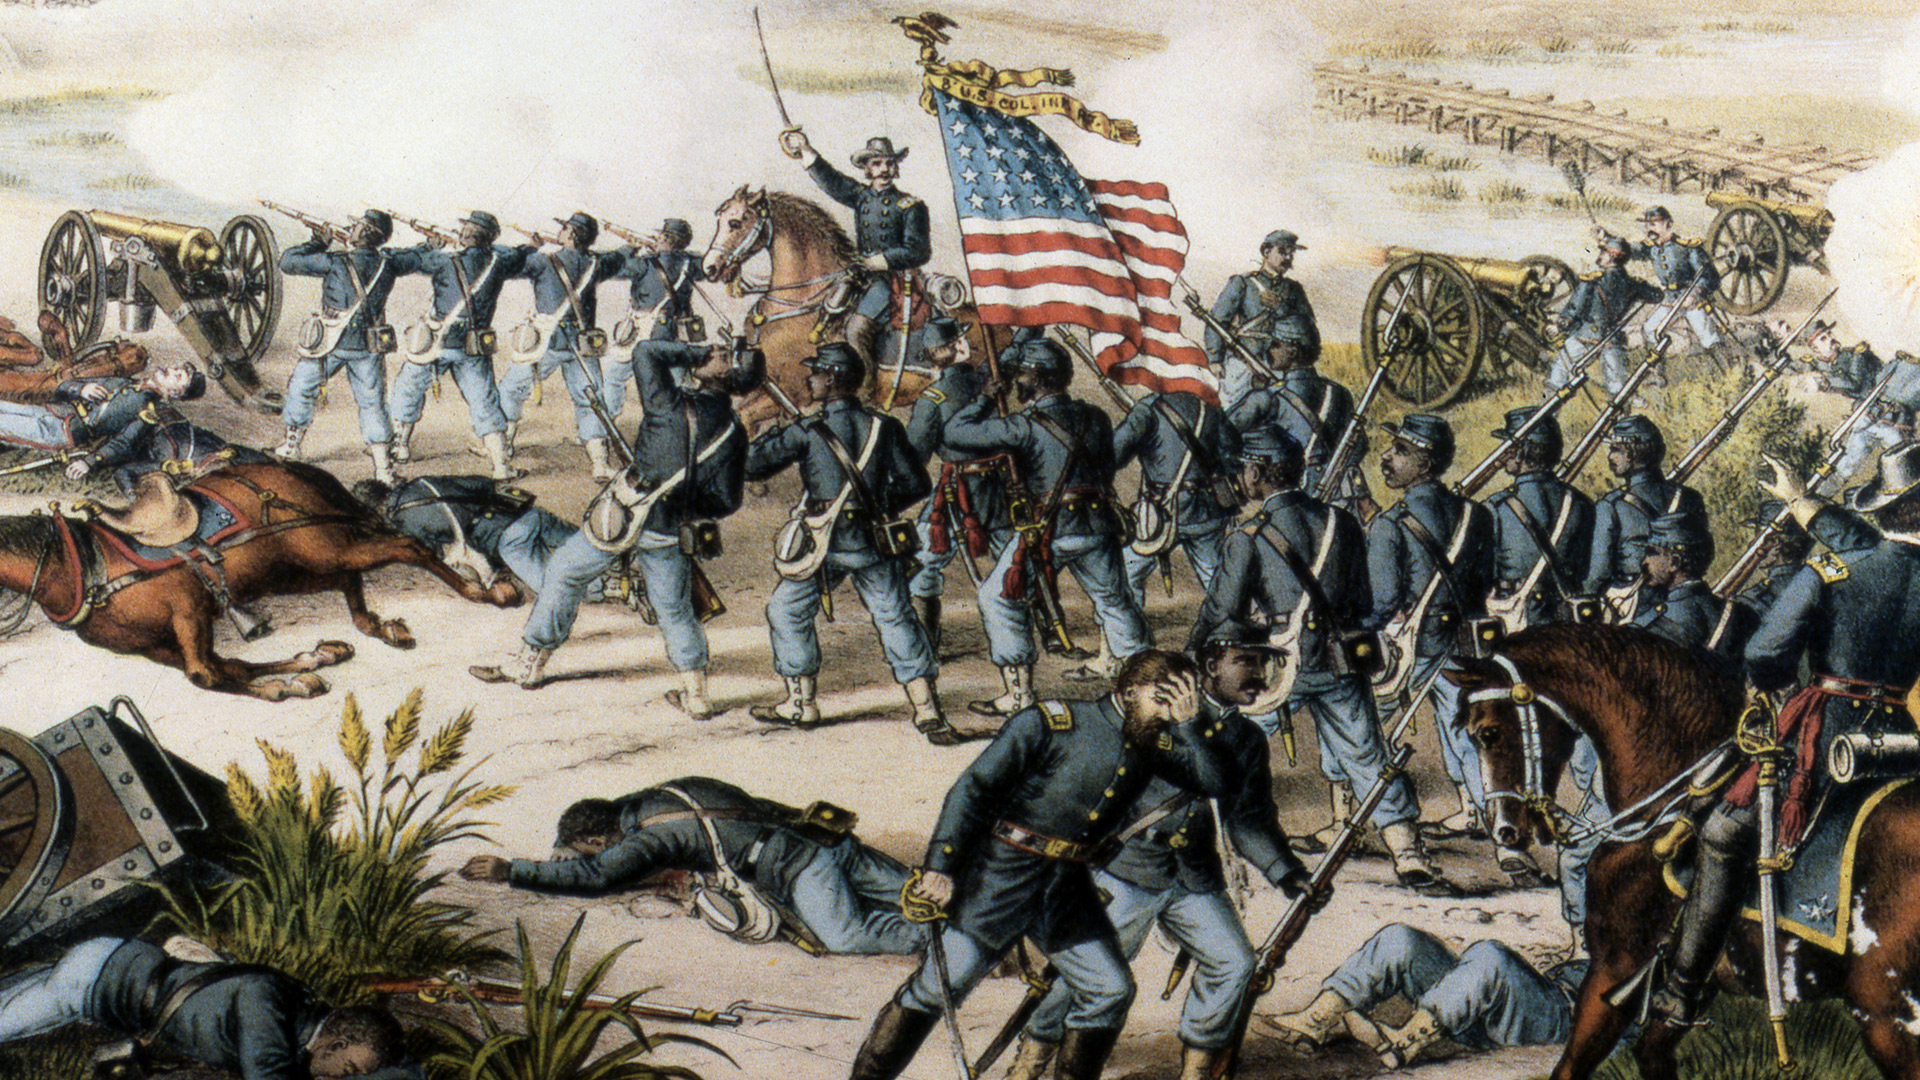 14th Annual Presidential Symposium - Florida and the Civil War